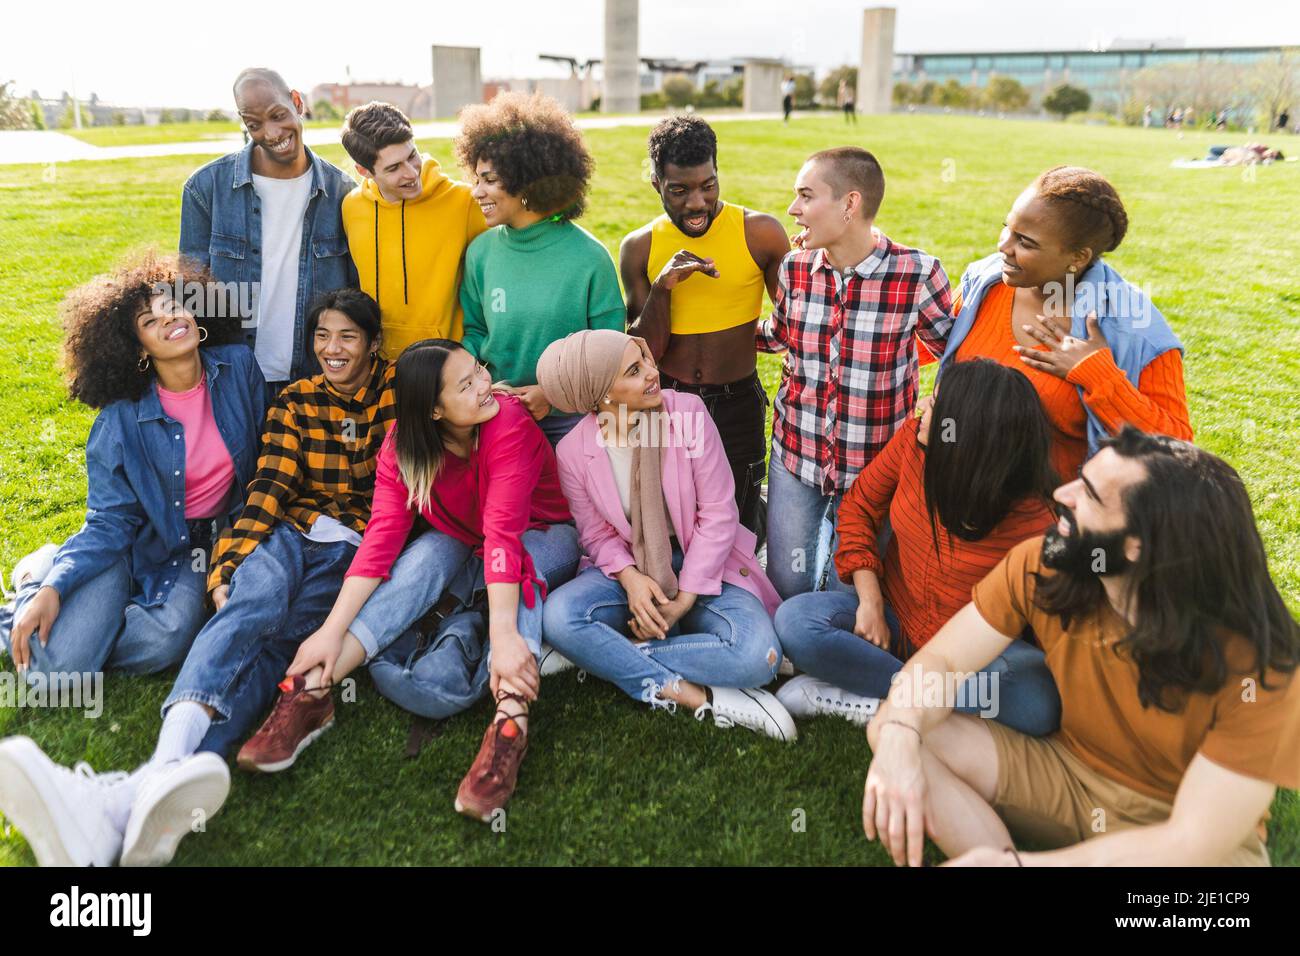 Group of young multiracial friends having fun together in park - Friendship and diversity concept Stock Photo